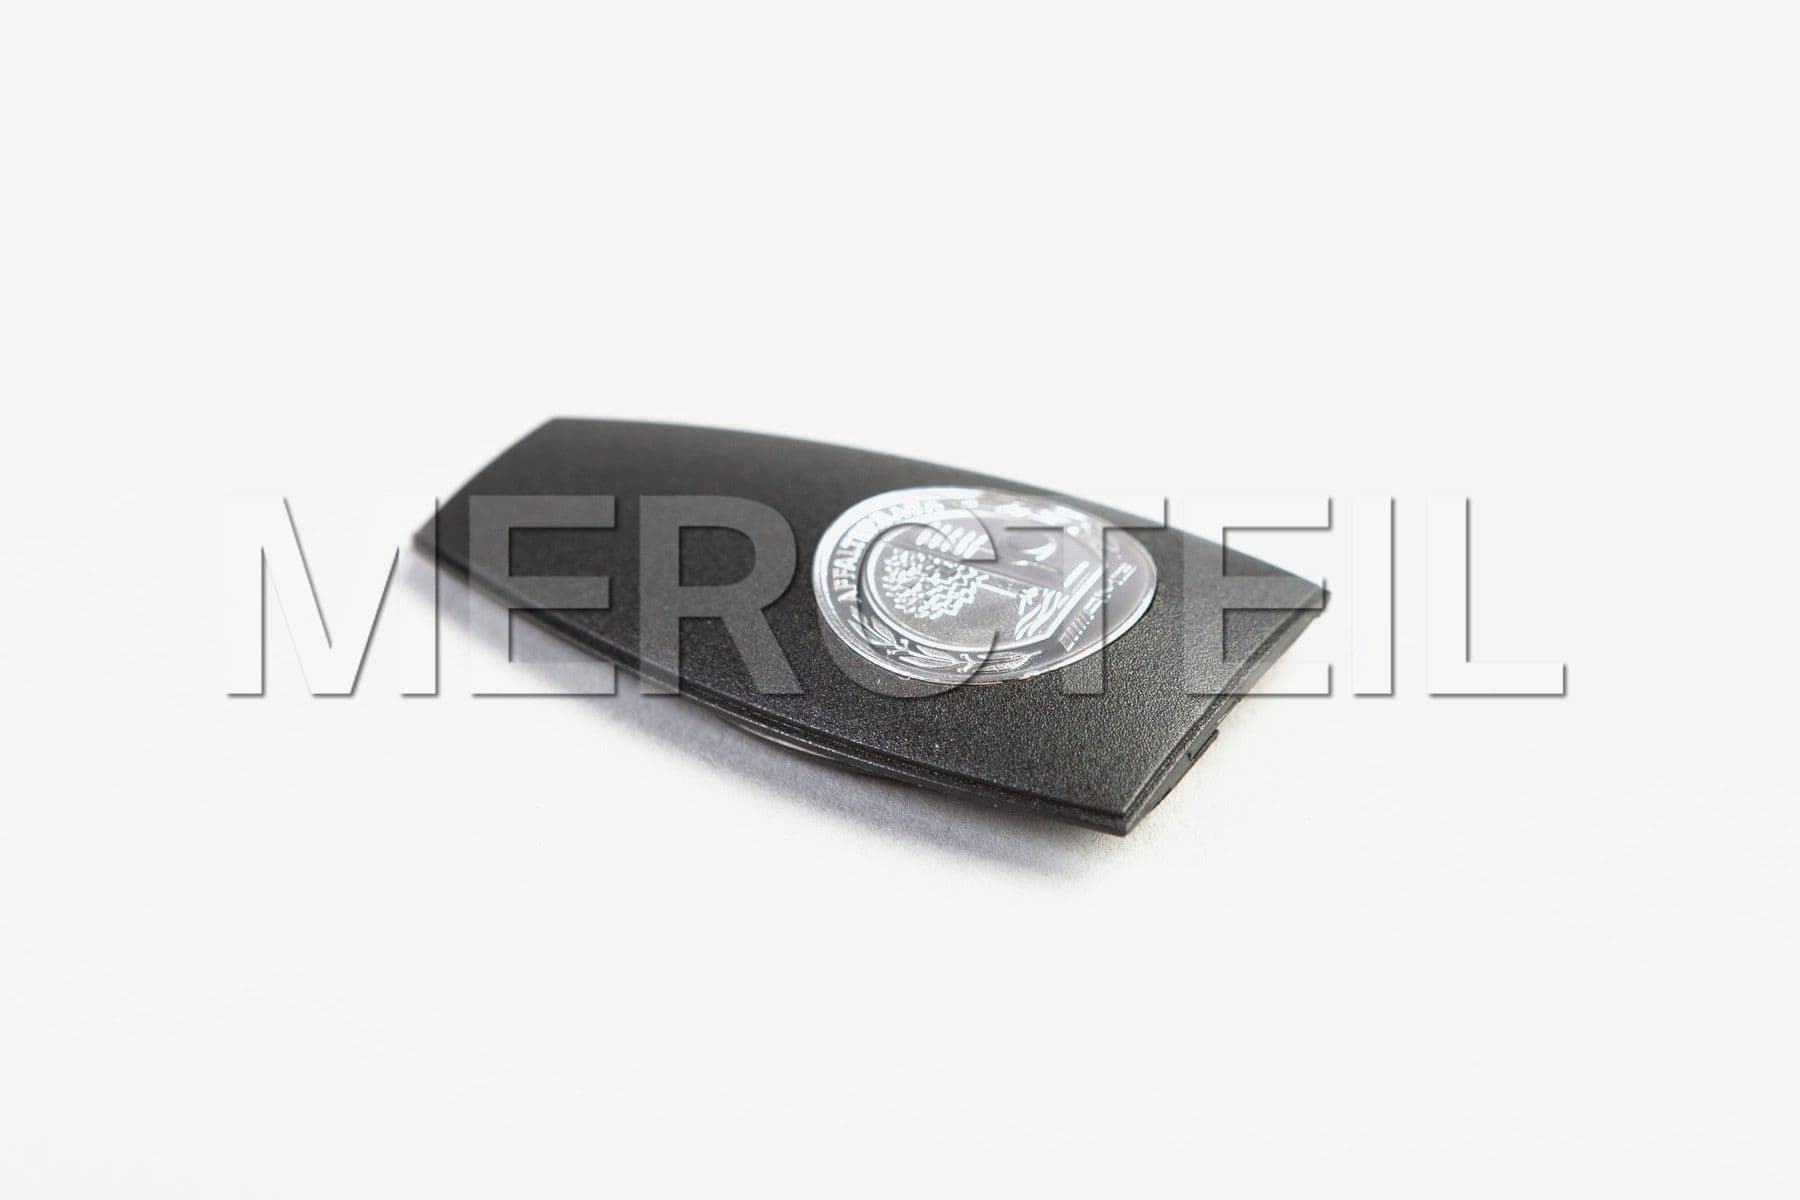 New Apple Tree Key Cover For Mercedes Benz A CLA Class AMG Key Cover A0008900023 